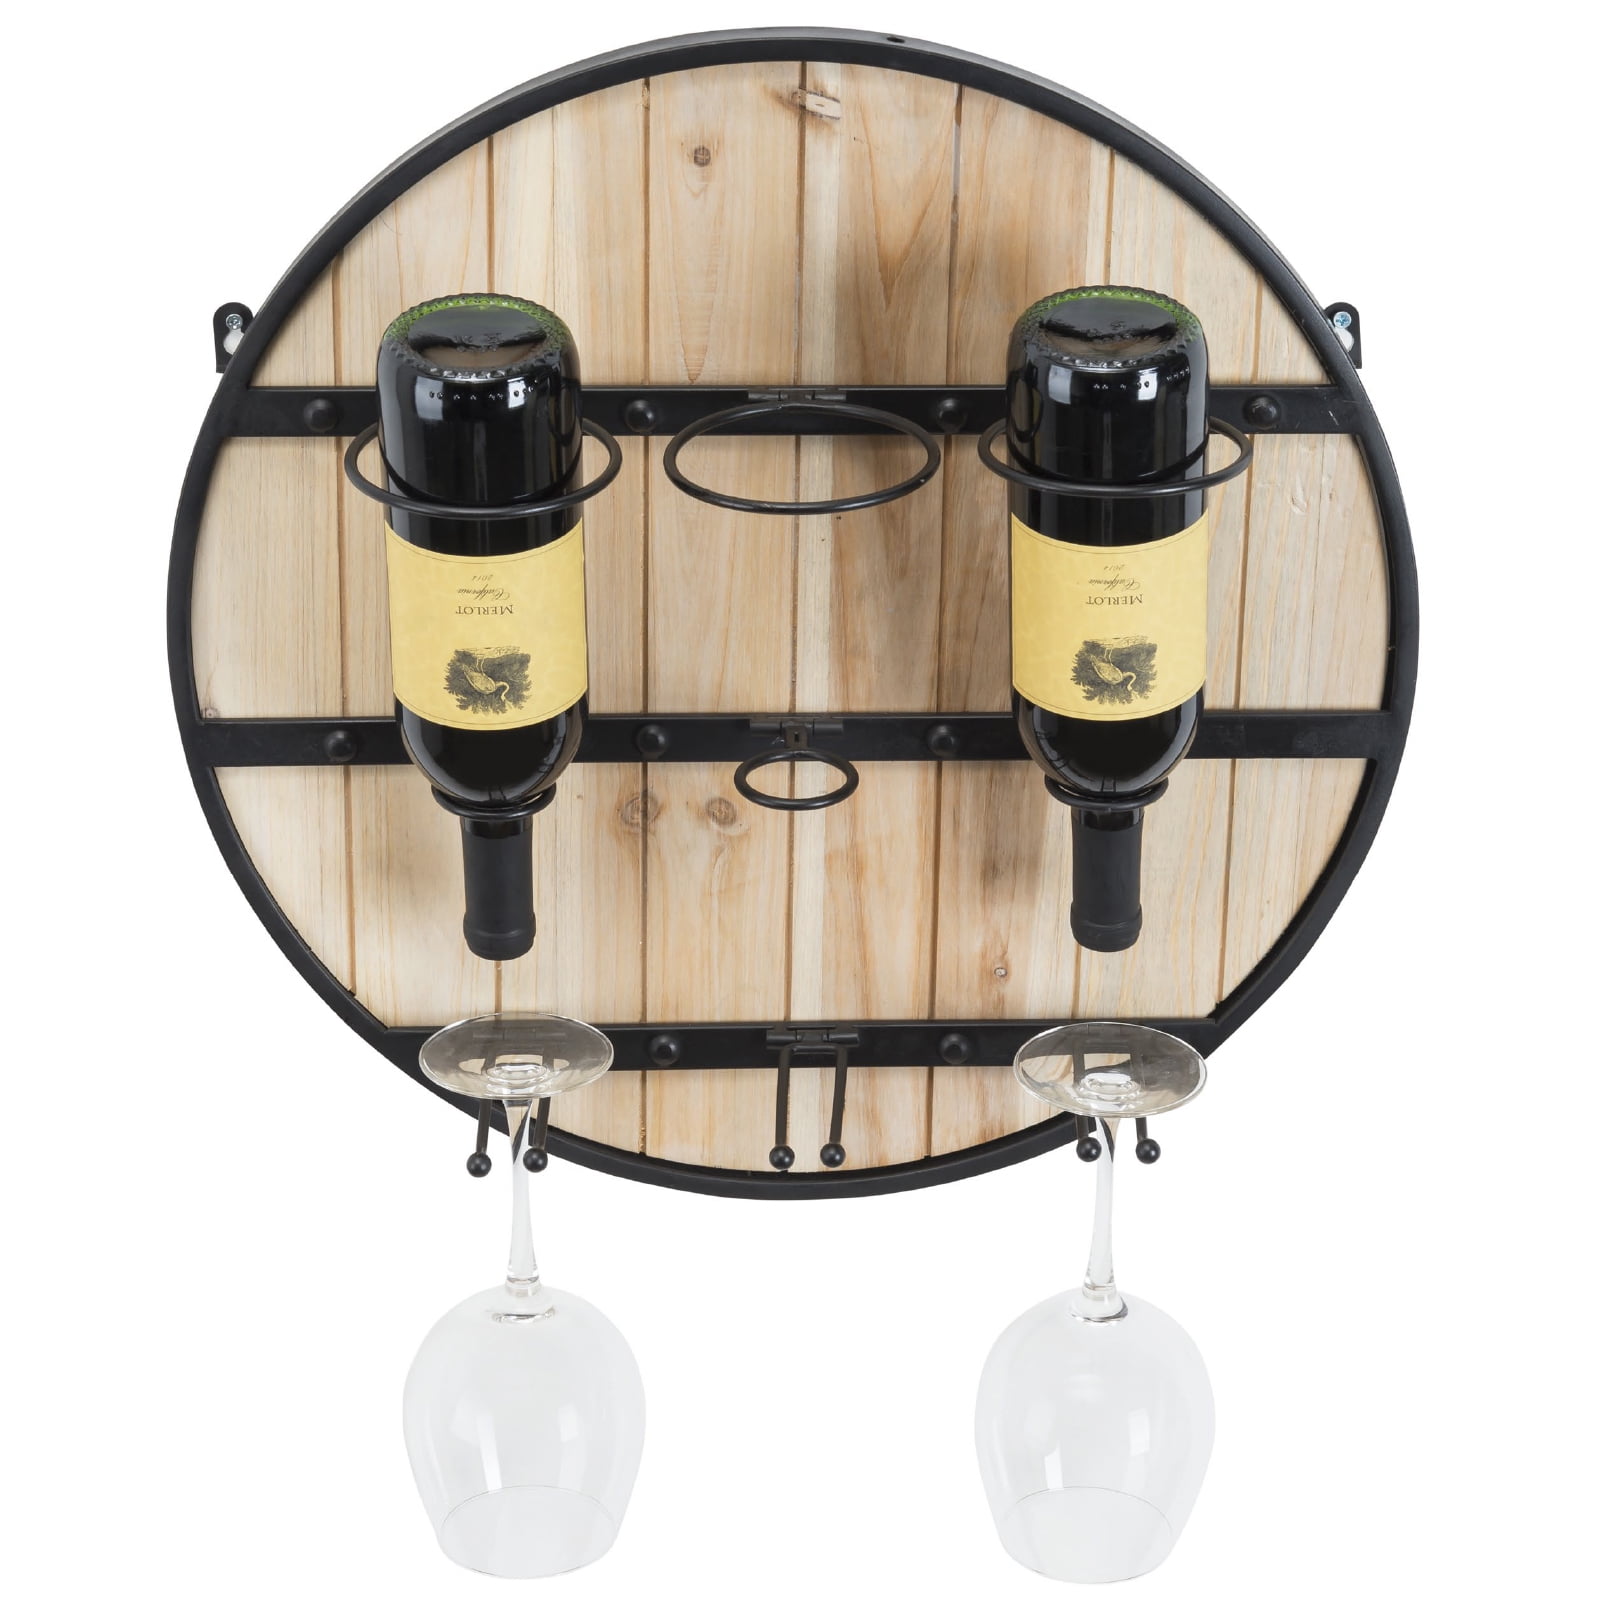 Excello Global Products Bicycle Wall Mounted Wine Rack: Wine 